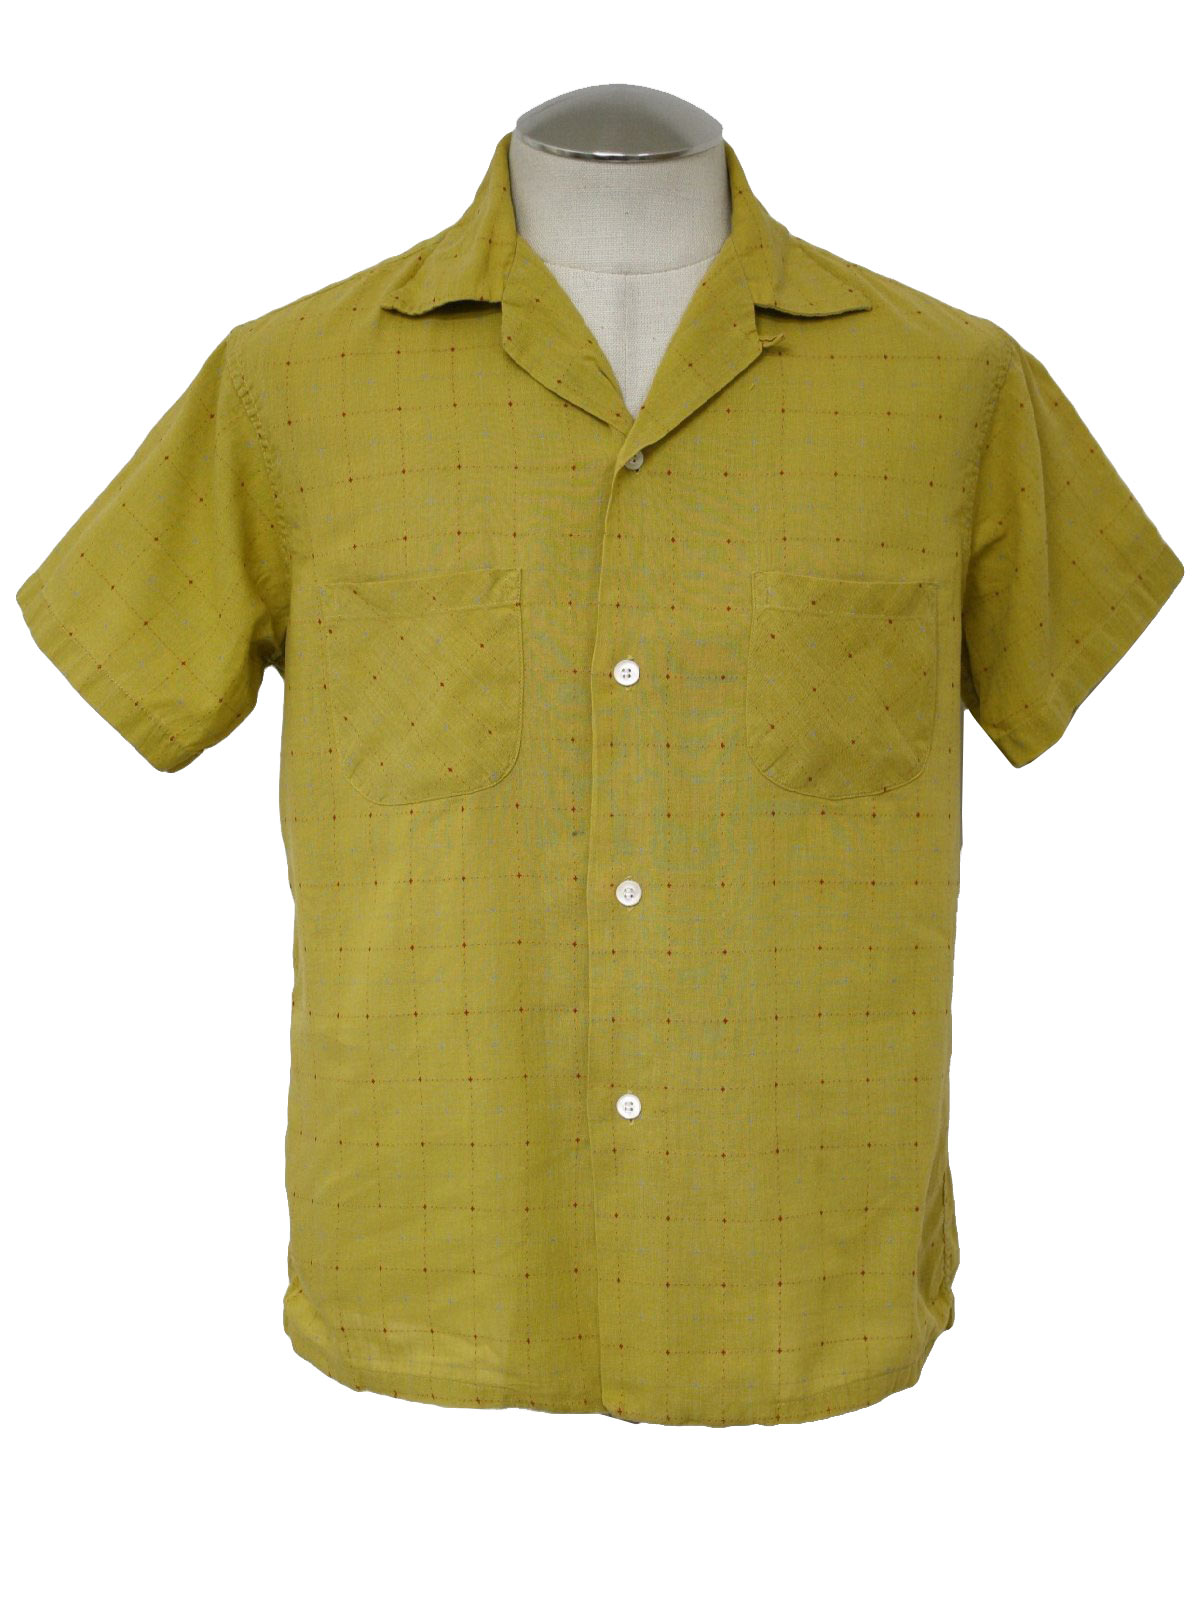 Retro 50's Shirt: 50s -Brentwood- Mens mustard yellow, red and blue ...